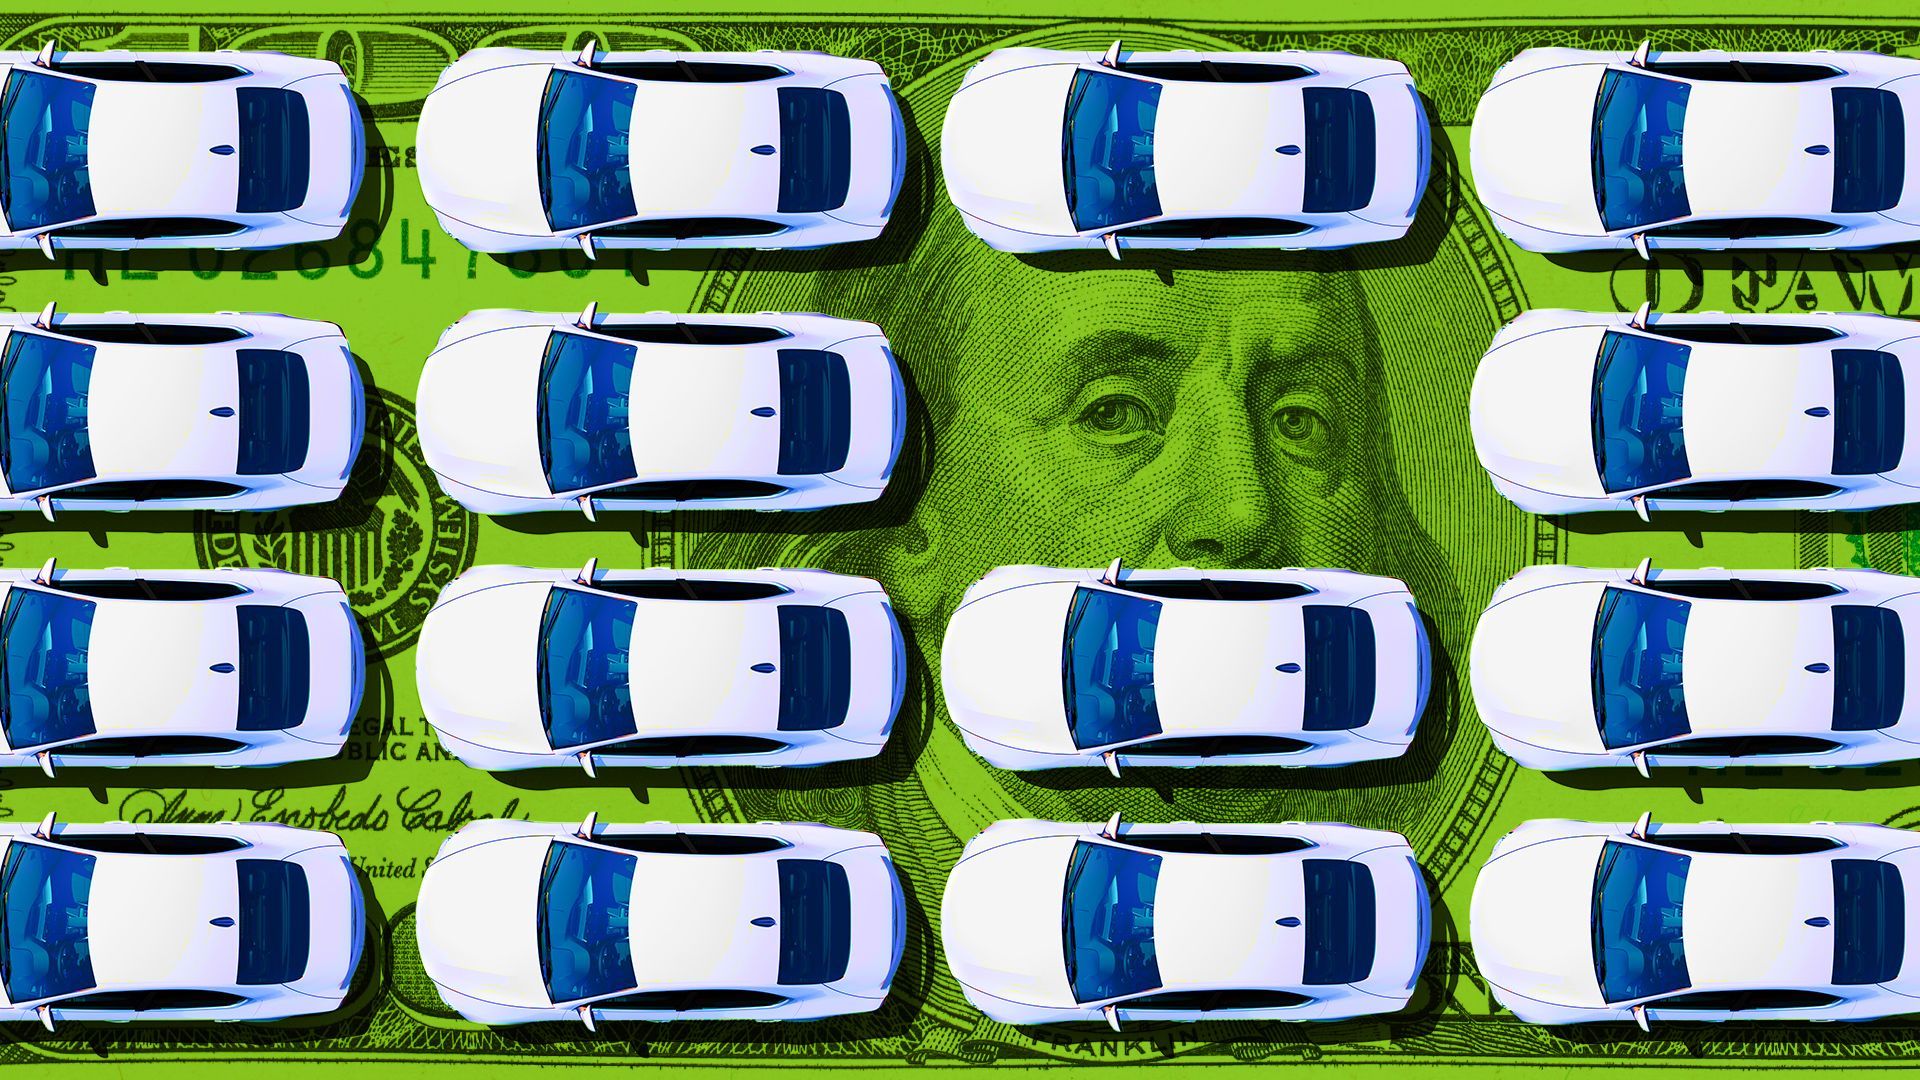 flight prices Illustration of a fleet of cars and trucks on a hundred dollar costs with Benjamin Franklin's eyes peering through. 